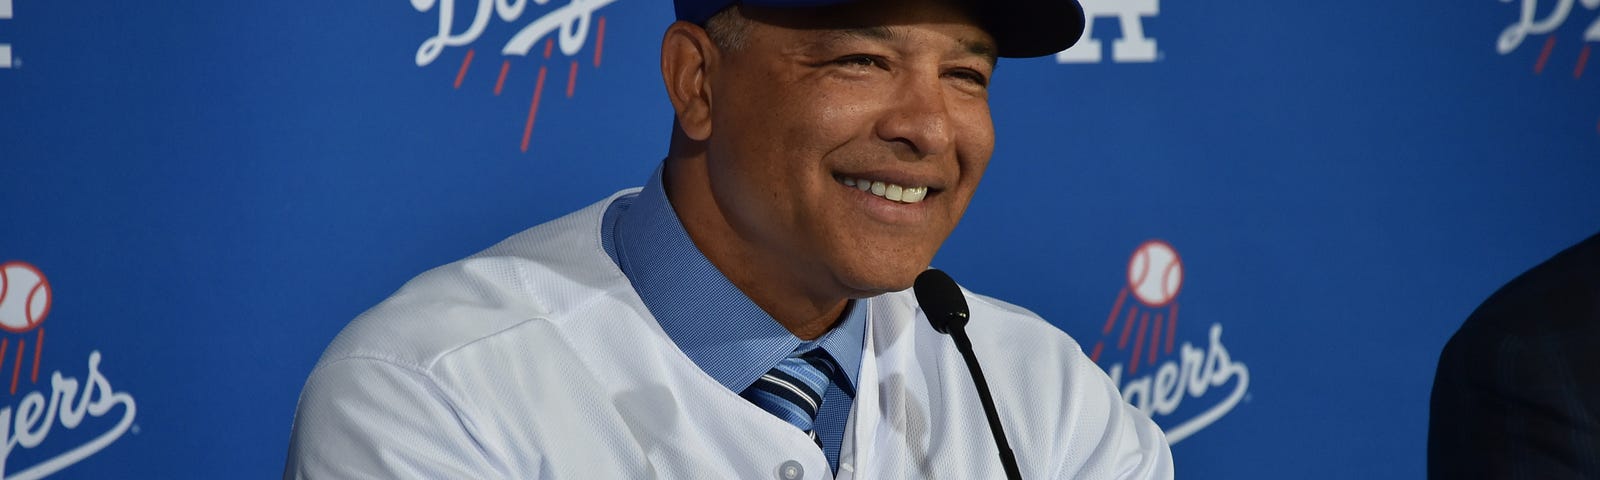 The origin story of Dave Roberts. More than a decade after